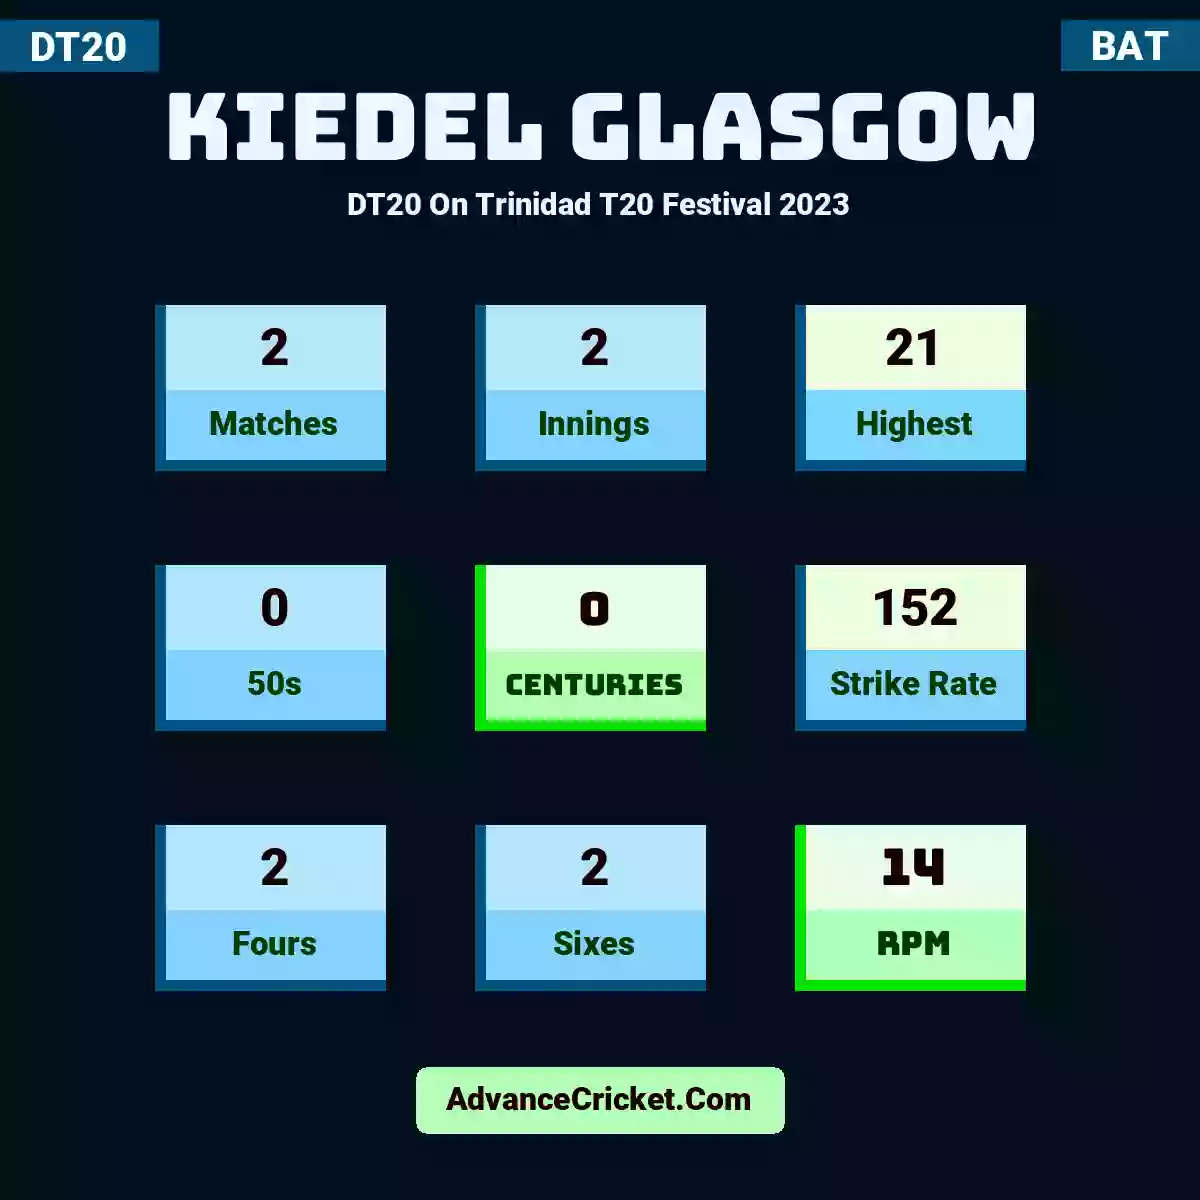 Kiedel Glasgow DT20  On Trinidad T20 Festival 2023, Kiedel Glasgow played 2 matches, scored 21 runs as highest, 0 half-centuries, and 0 centuries, with a strike rate of 152. k.glasgow hit 2 fours and 2 sixes, with an RPM of 14.